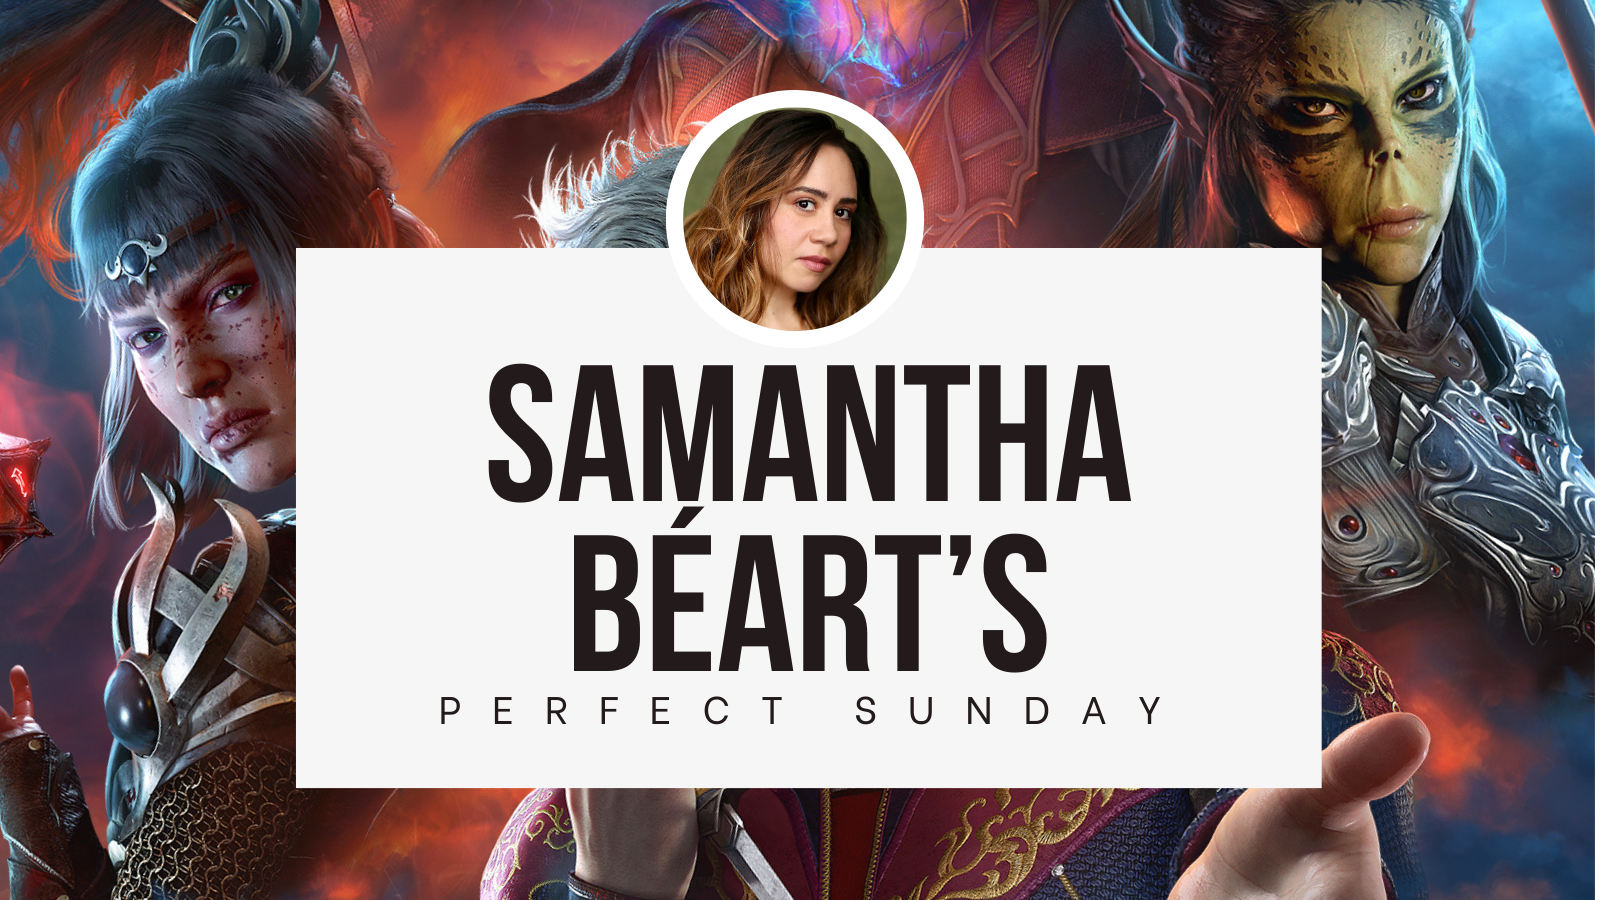 A perfect Sunday with...Samantha Béart